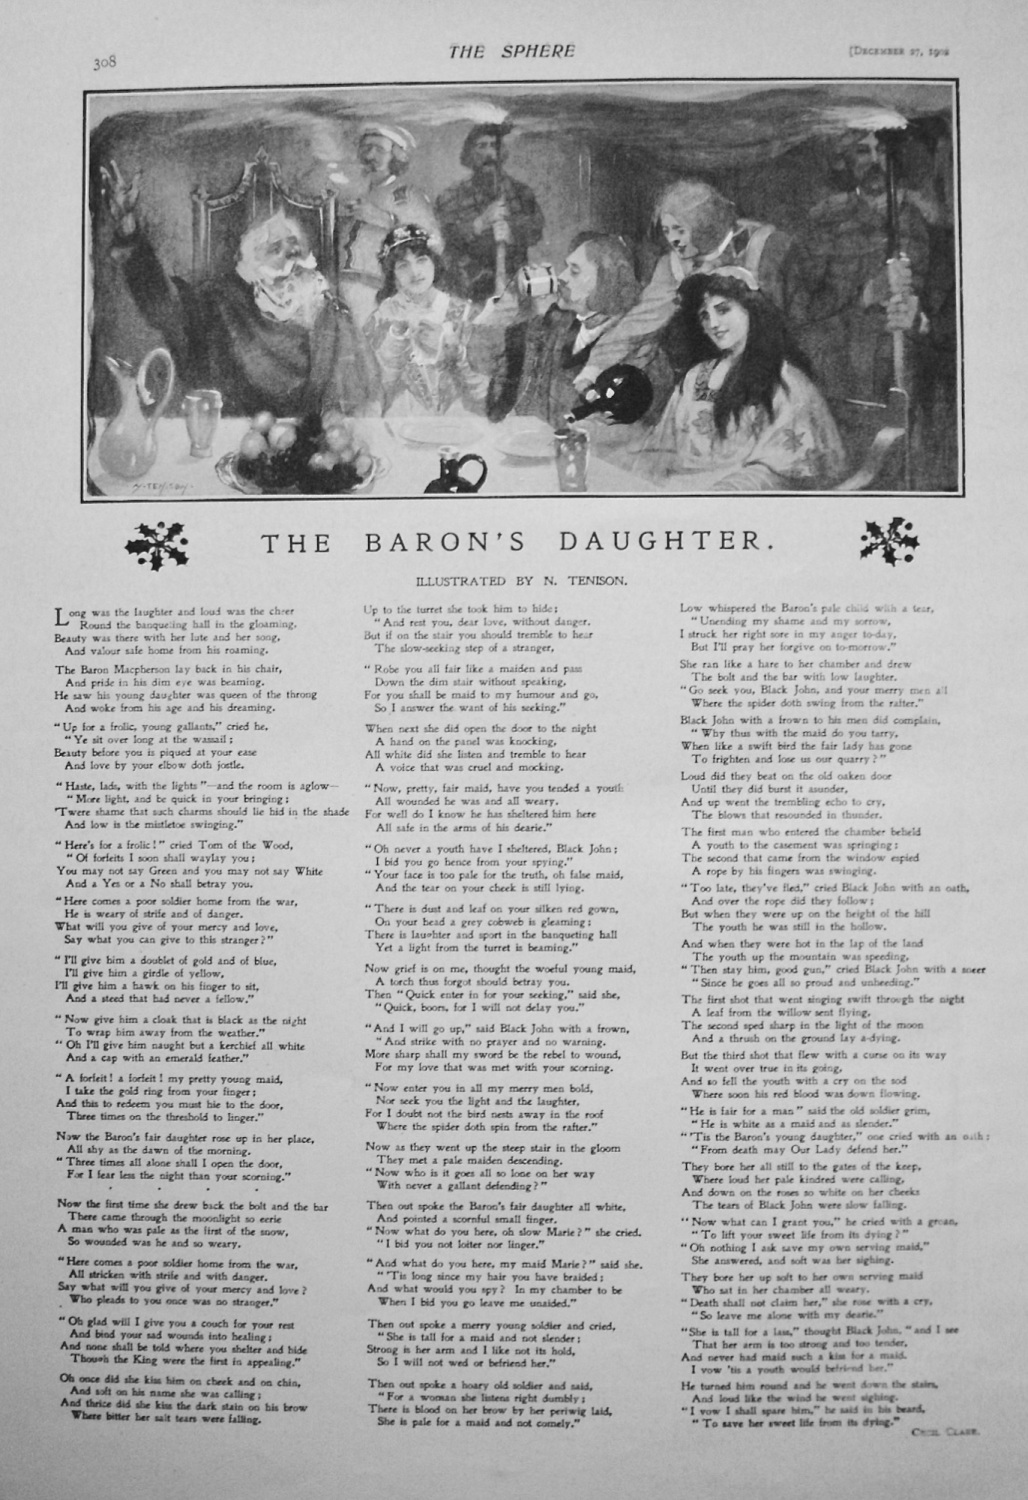 The Baron's Daughter. 1902